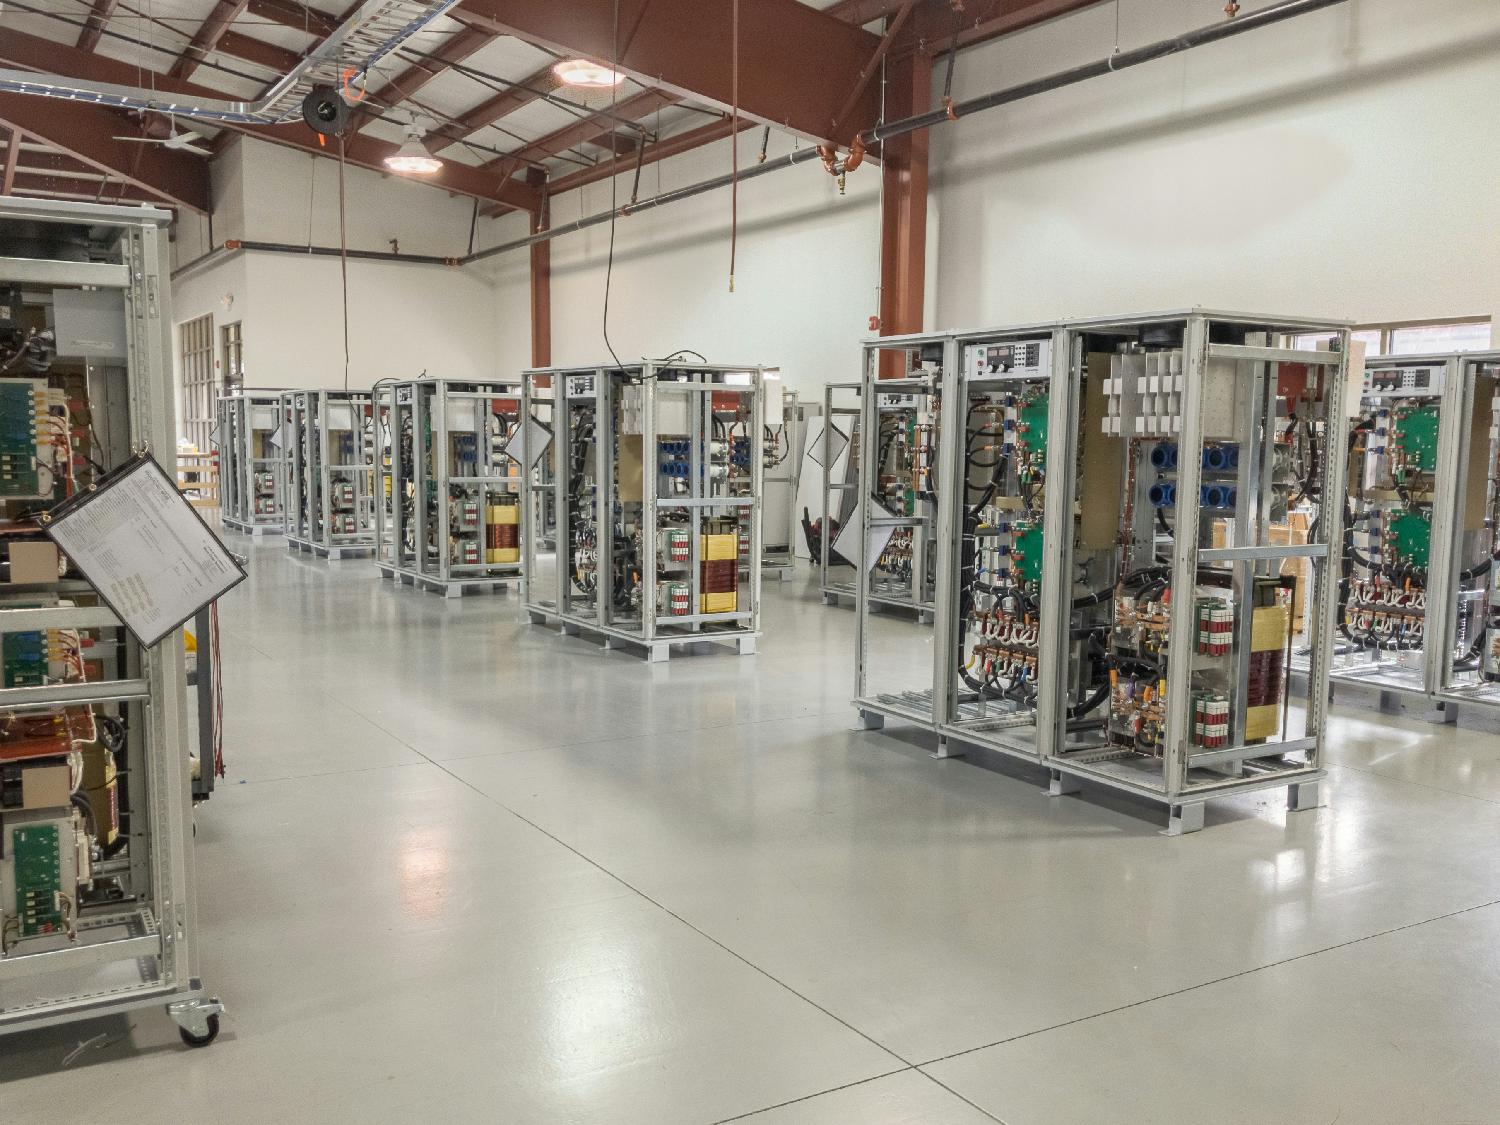 Production of over 3,000 kW of programmable DC power supplies. 